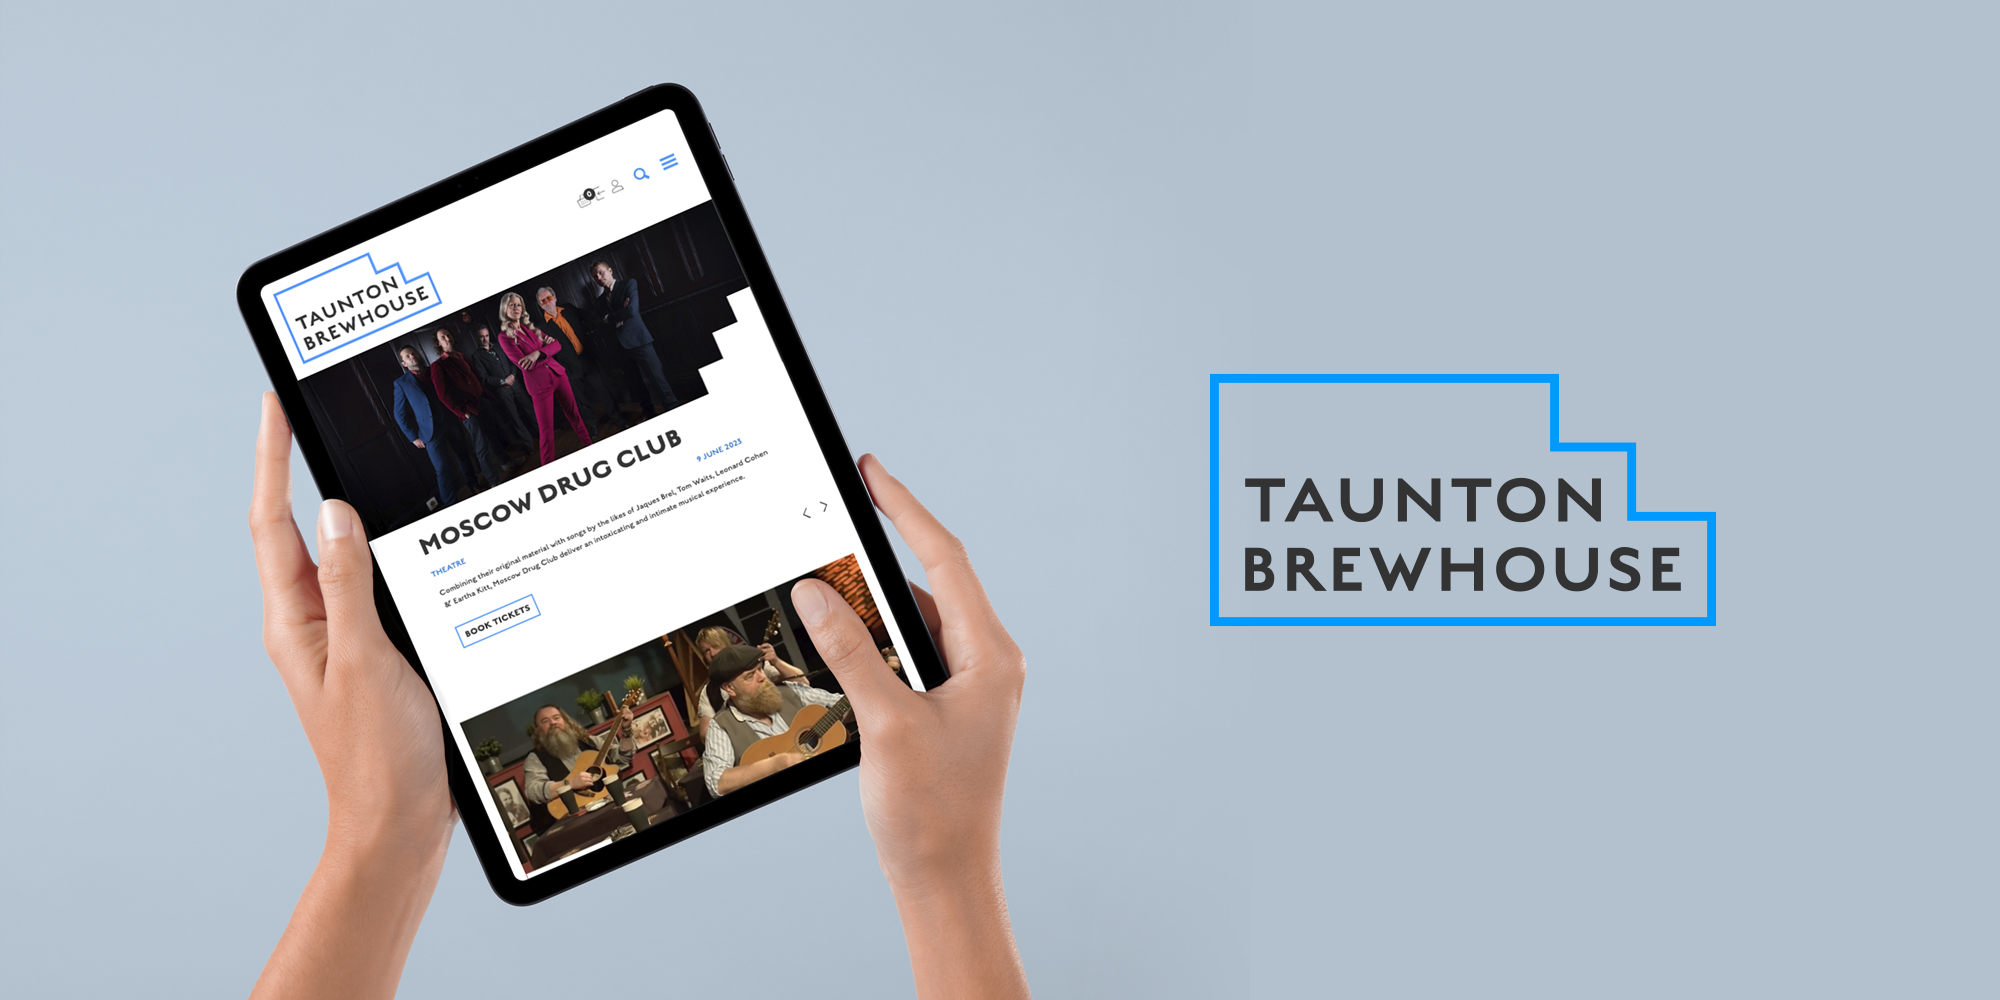 Taunton Brewhouse logo and icons and pages shown on a tablet screen